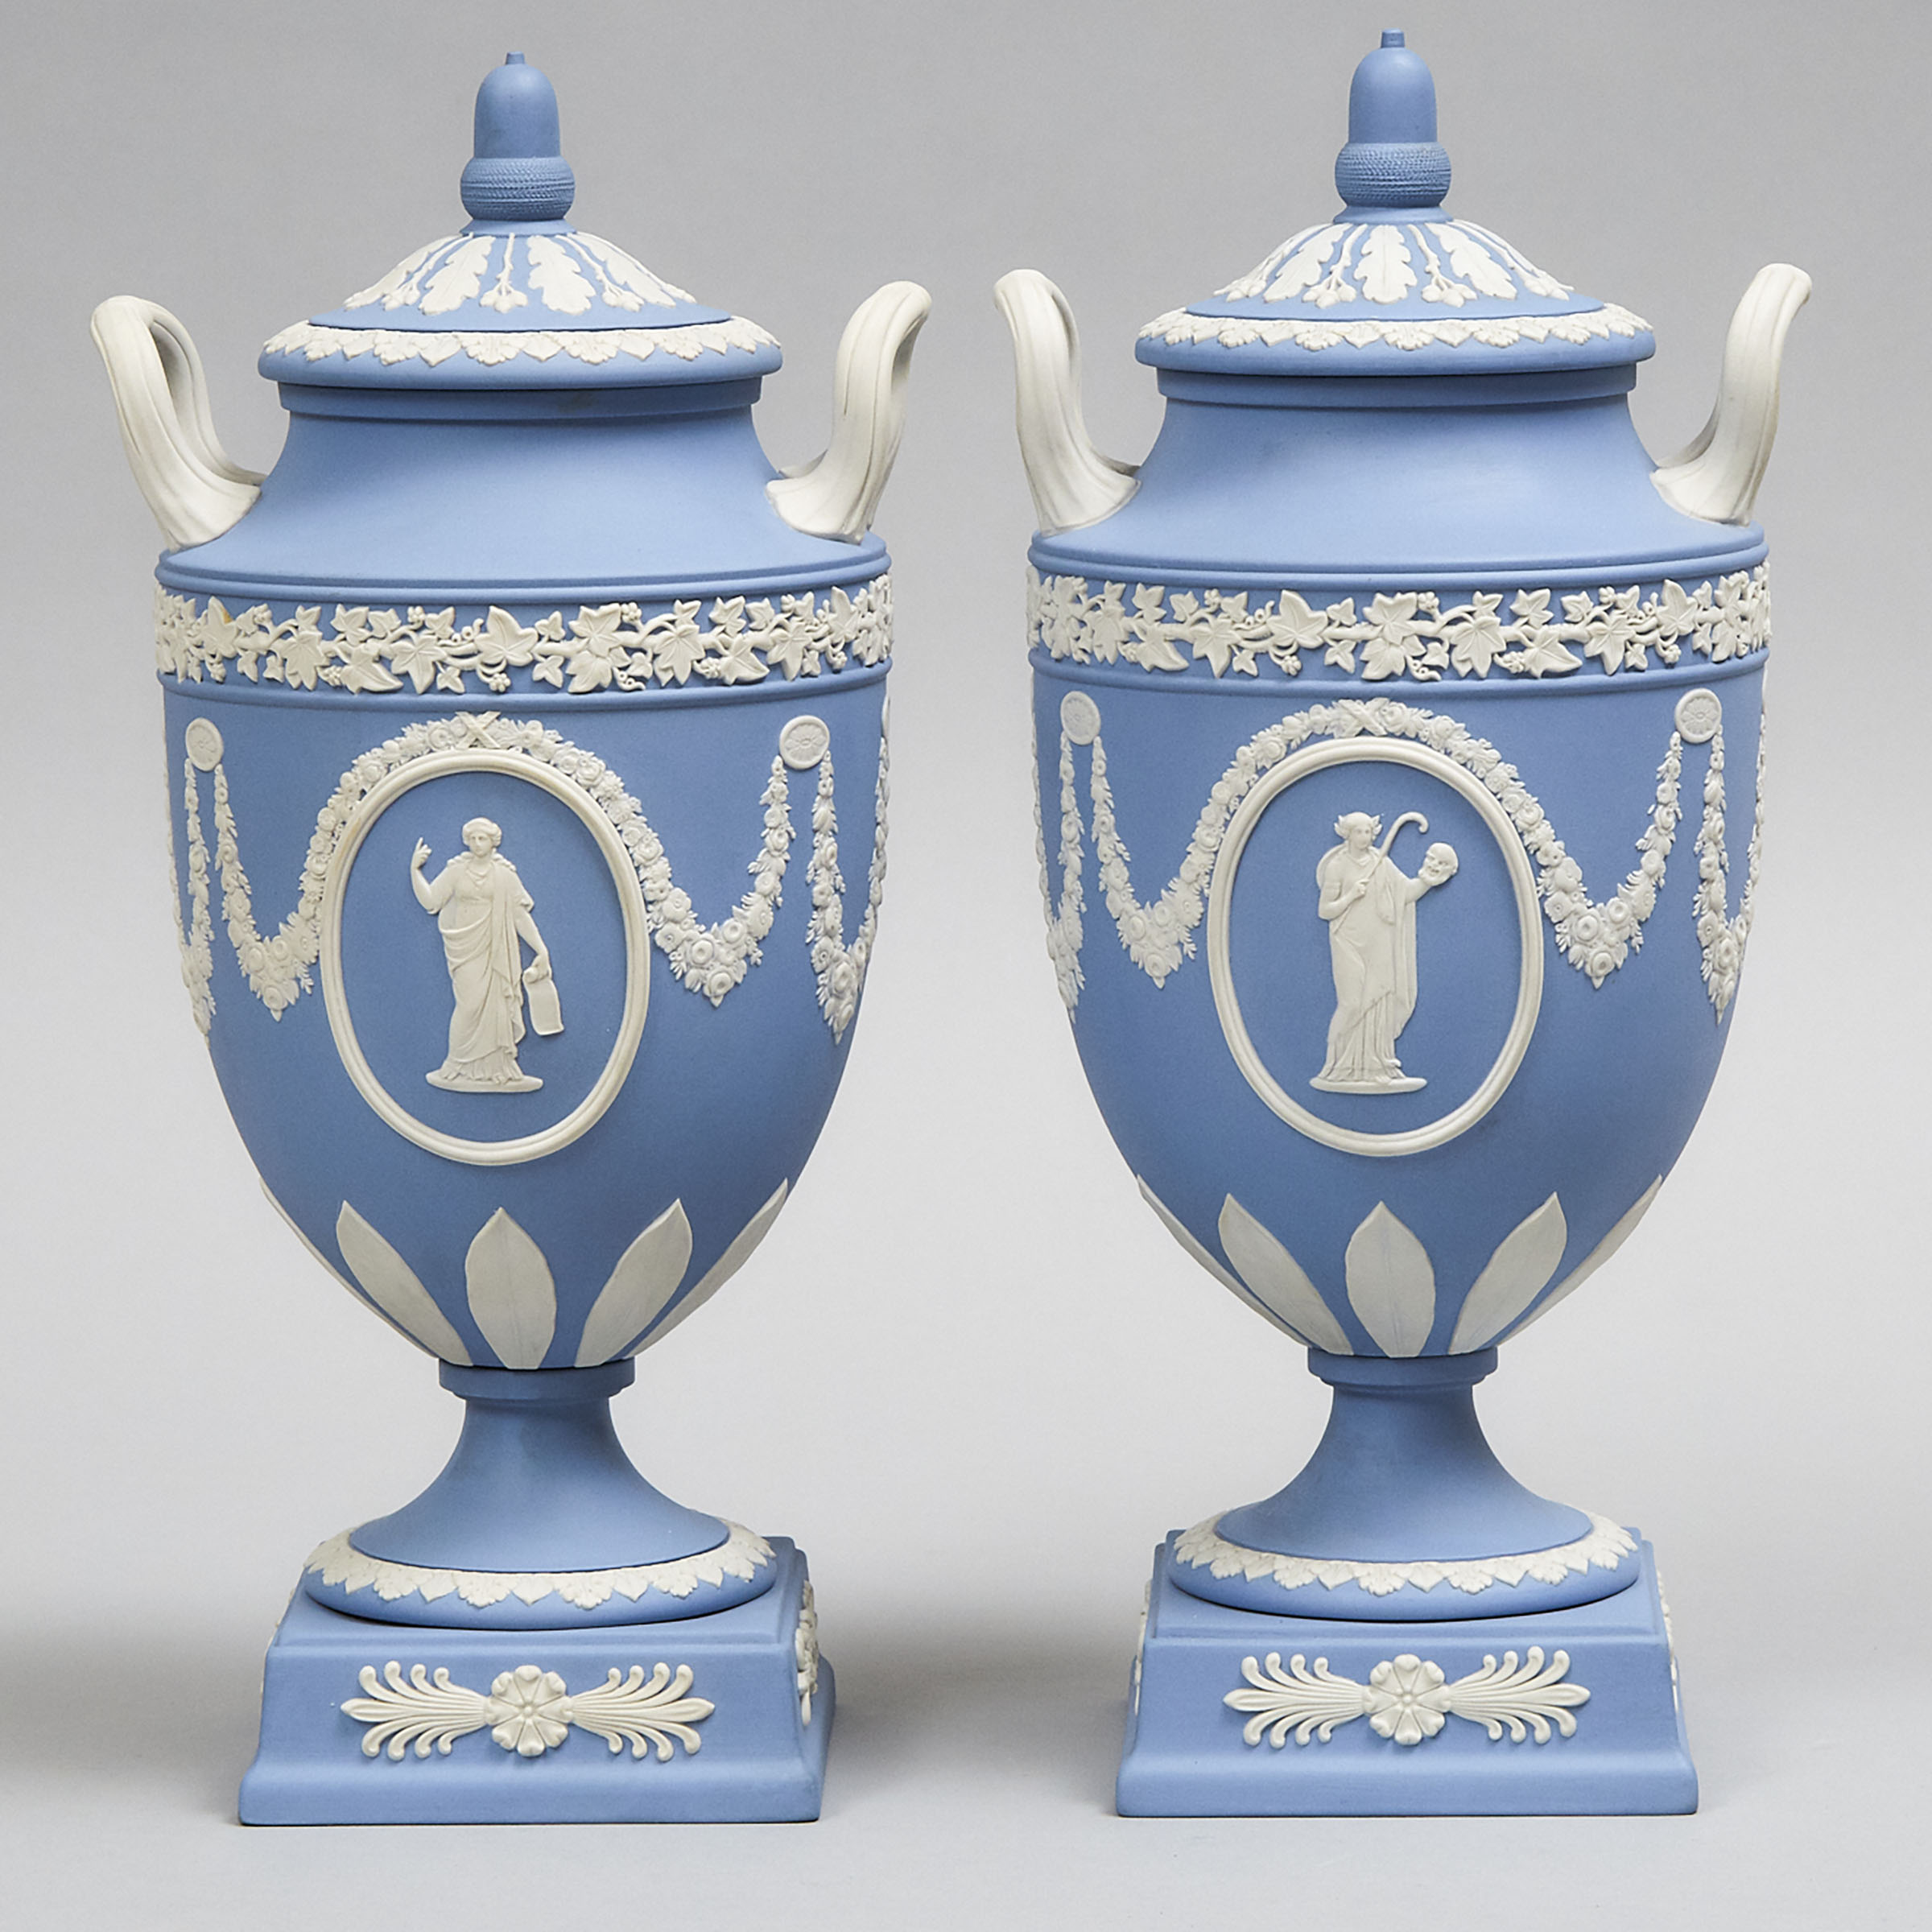 Pair of Wedgwood Blue Jasper Two-Handled Urn-Form Vases with Covers, 20th century